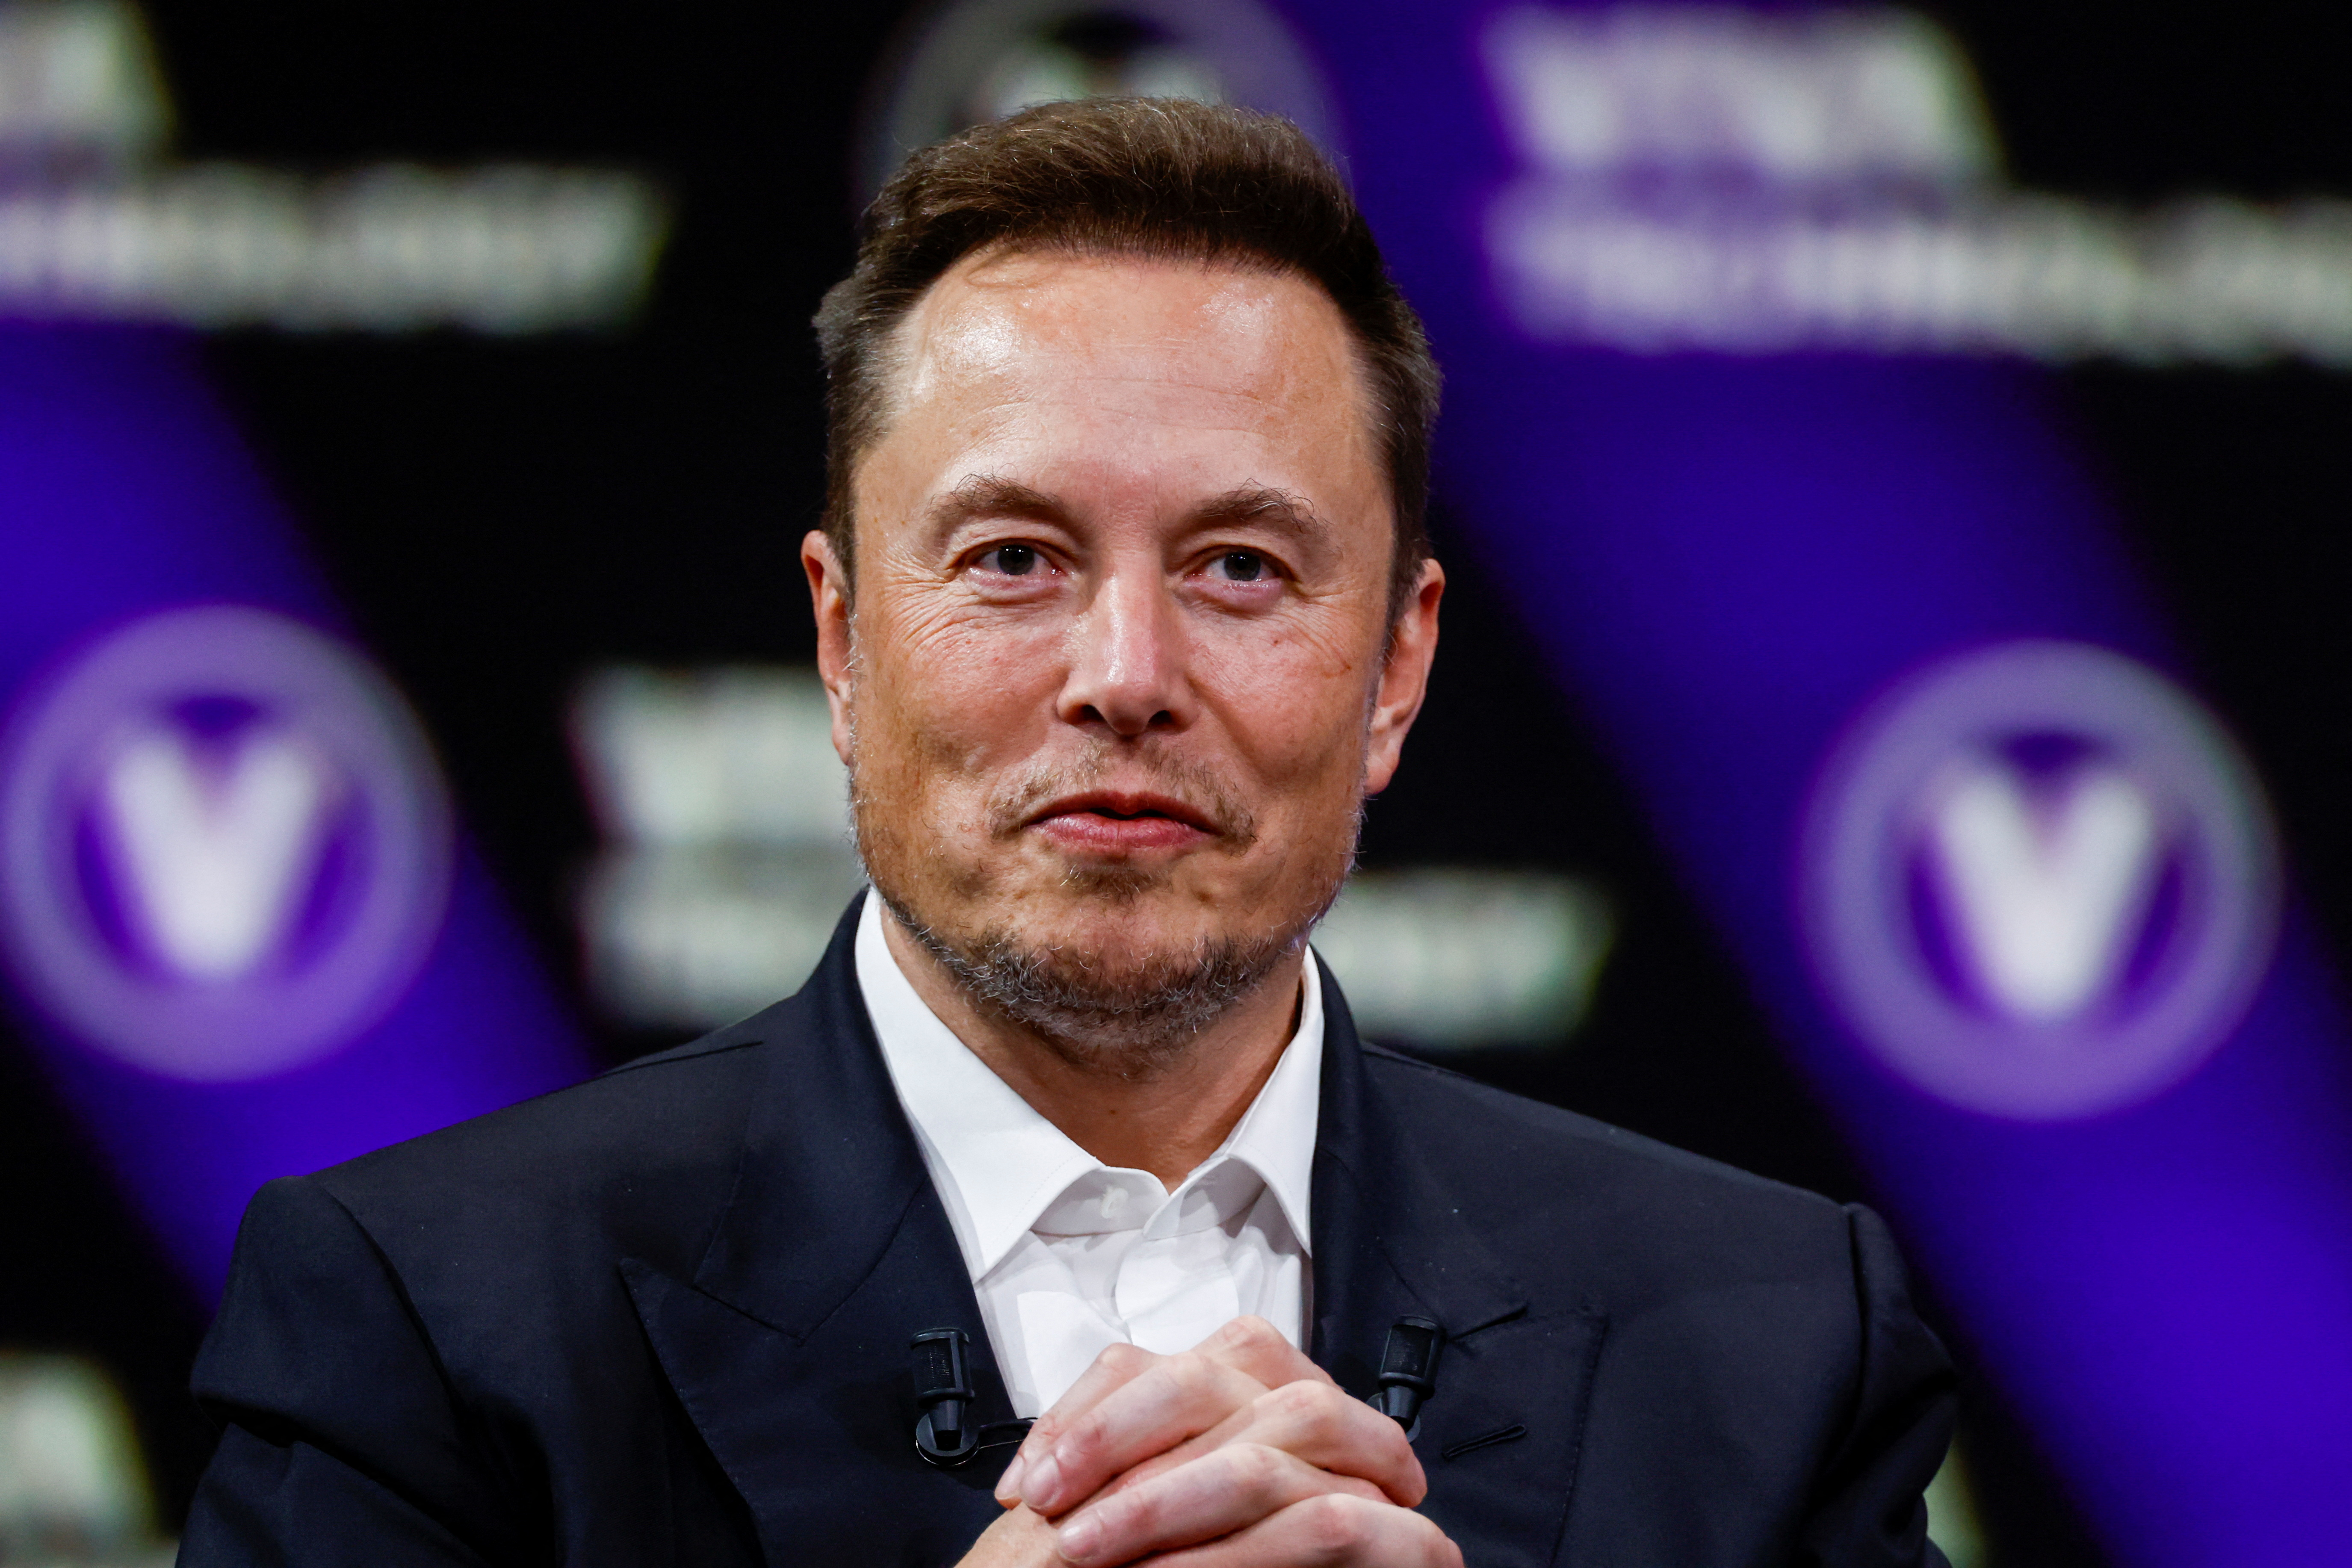 Musk will train if Las Vegas martial arts cage match takes hold